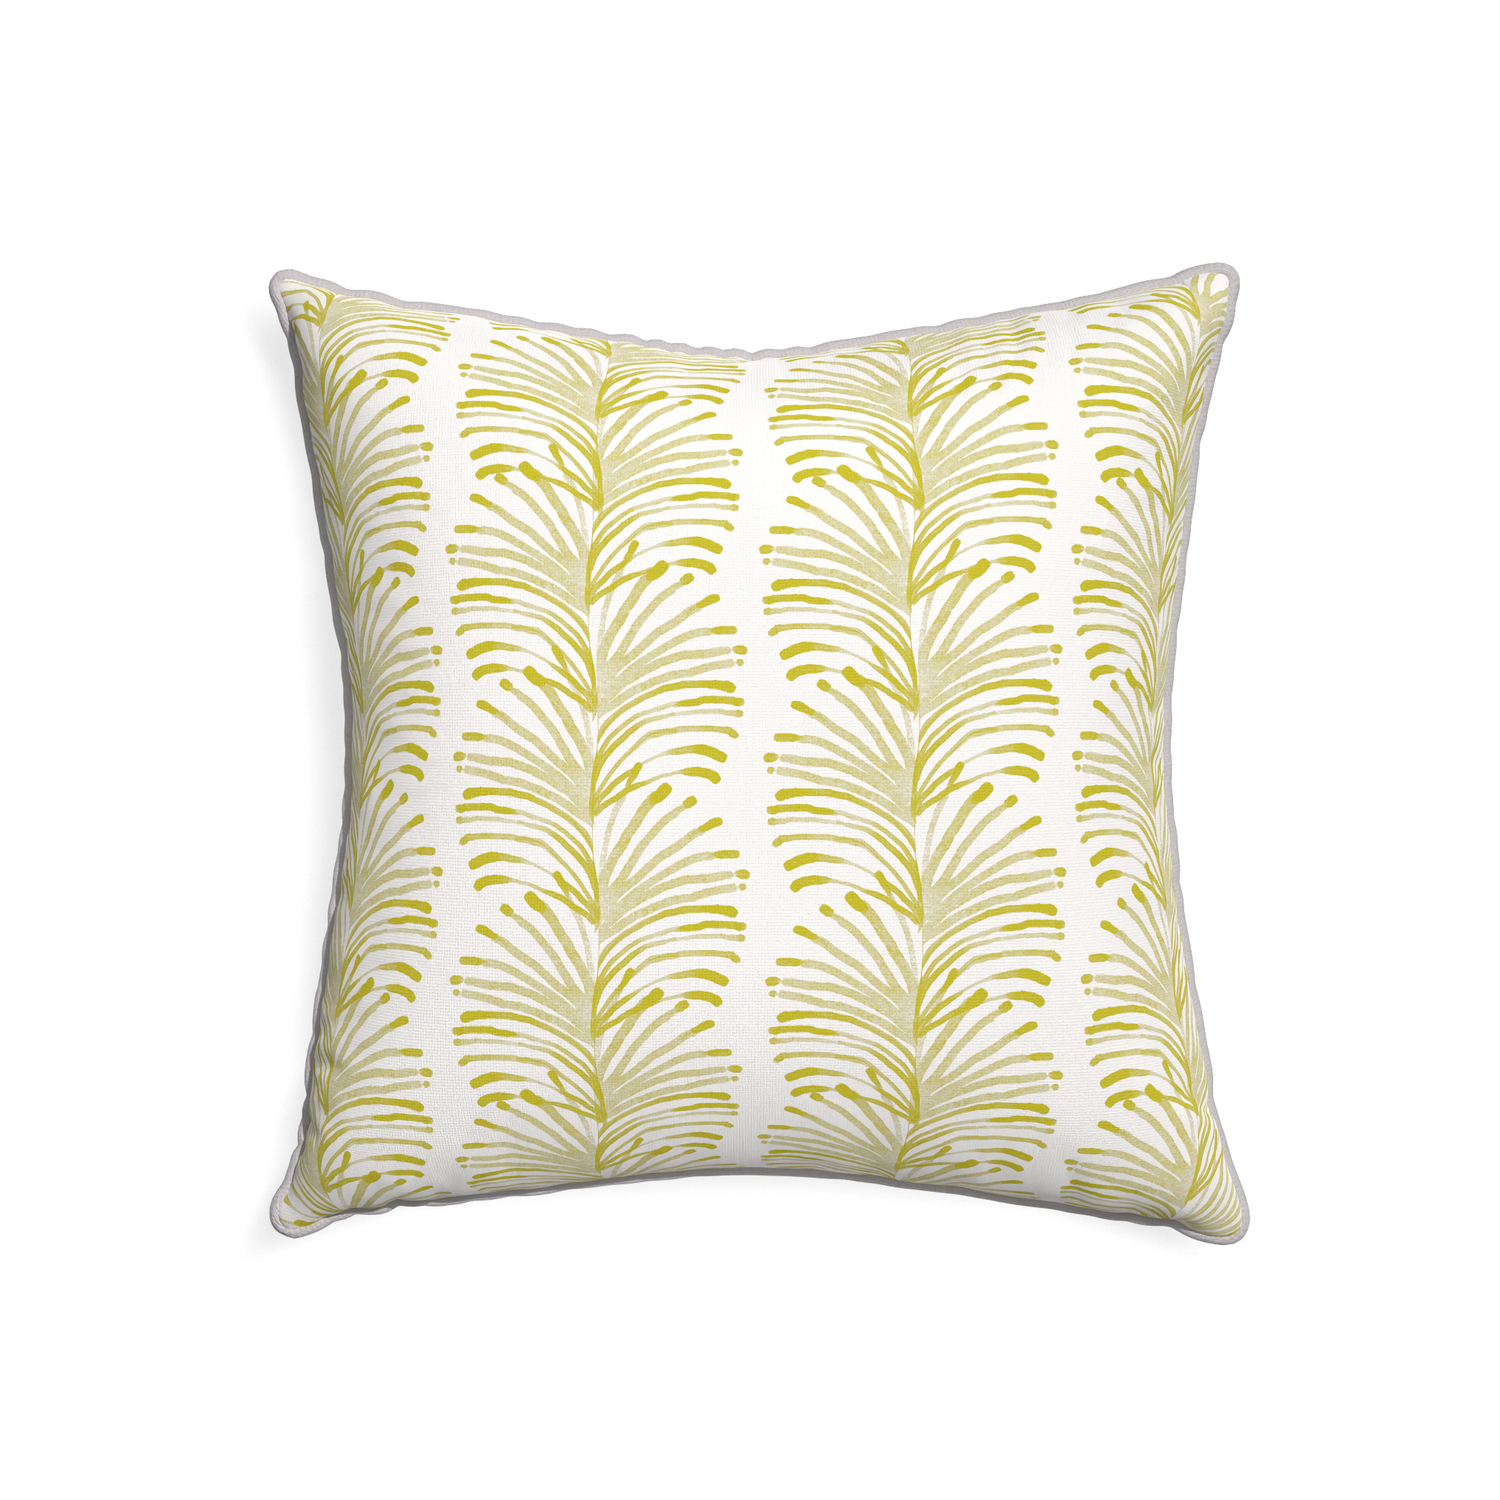 22-square emma chartreuse custom pillow with pebble piping on white background